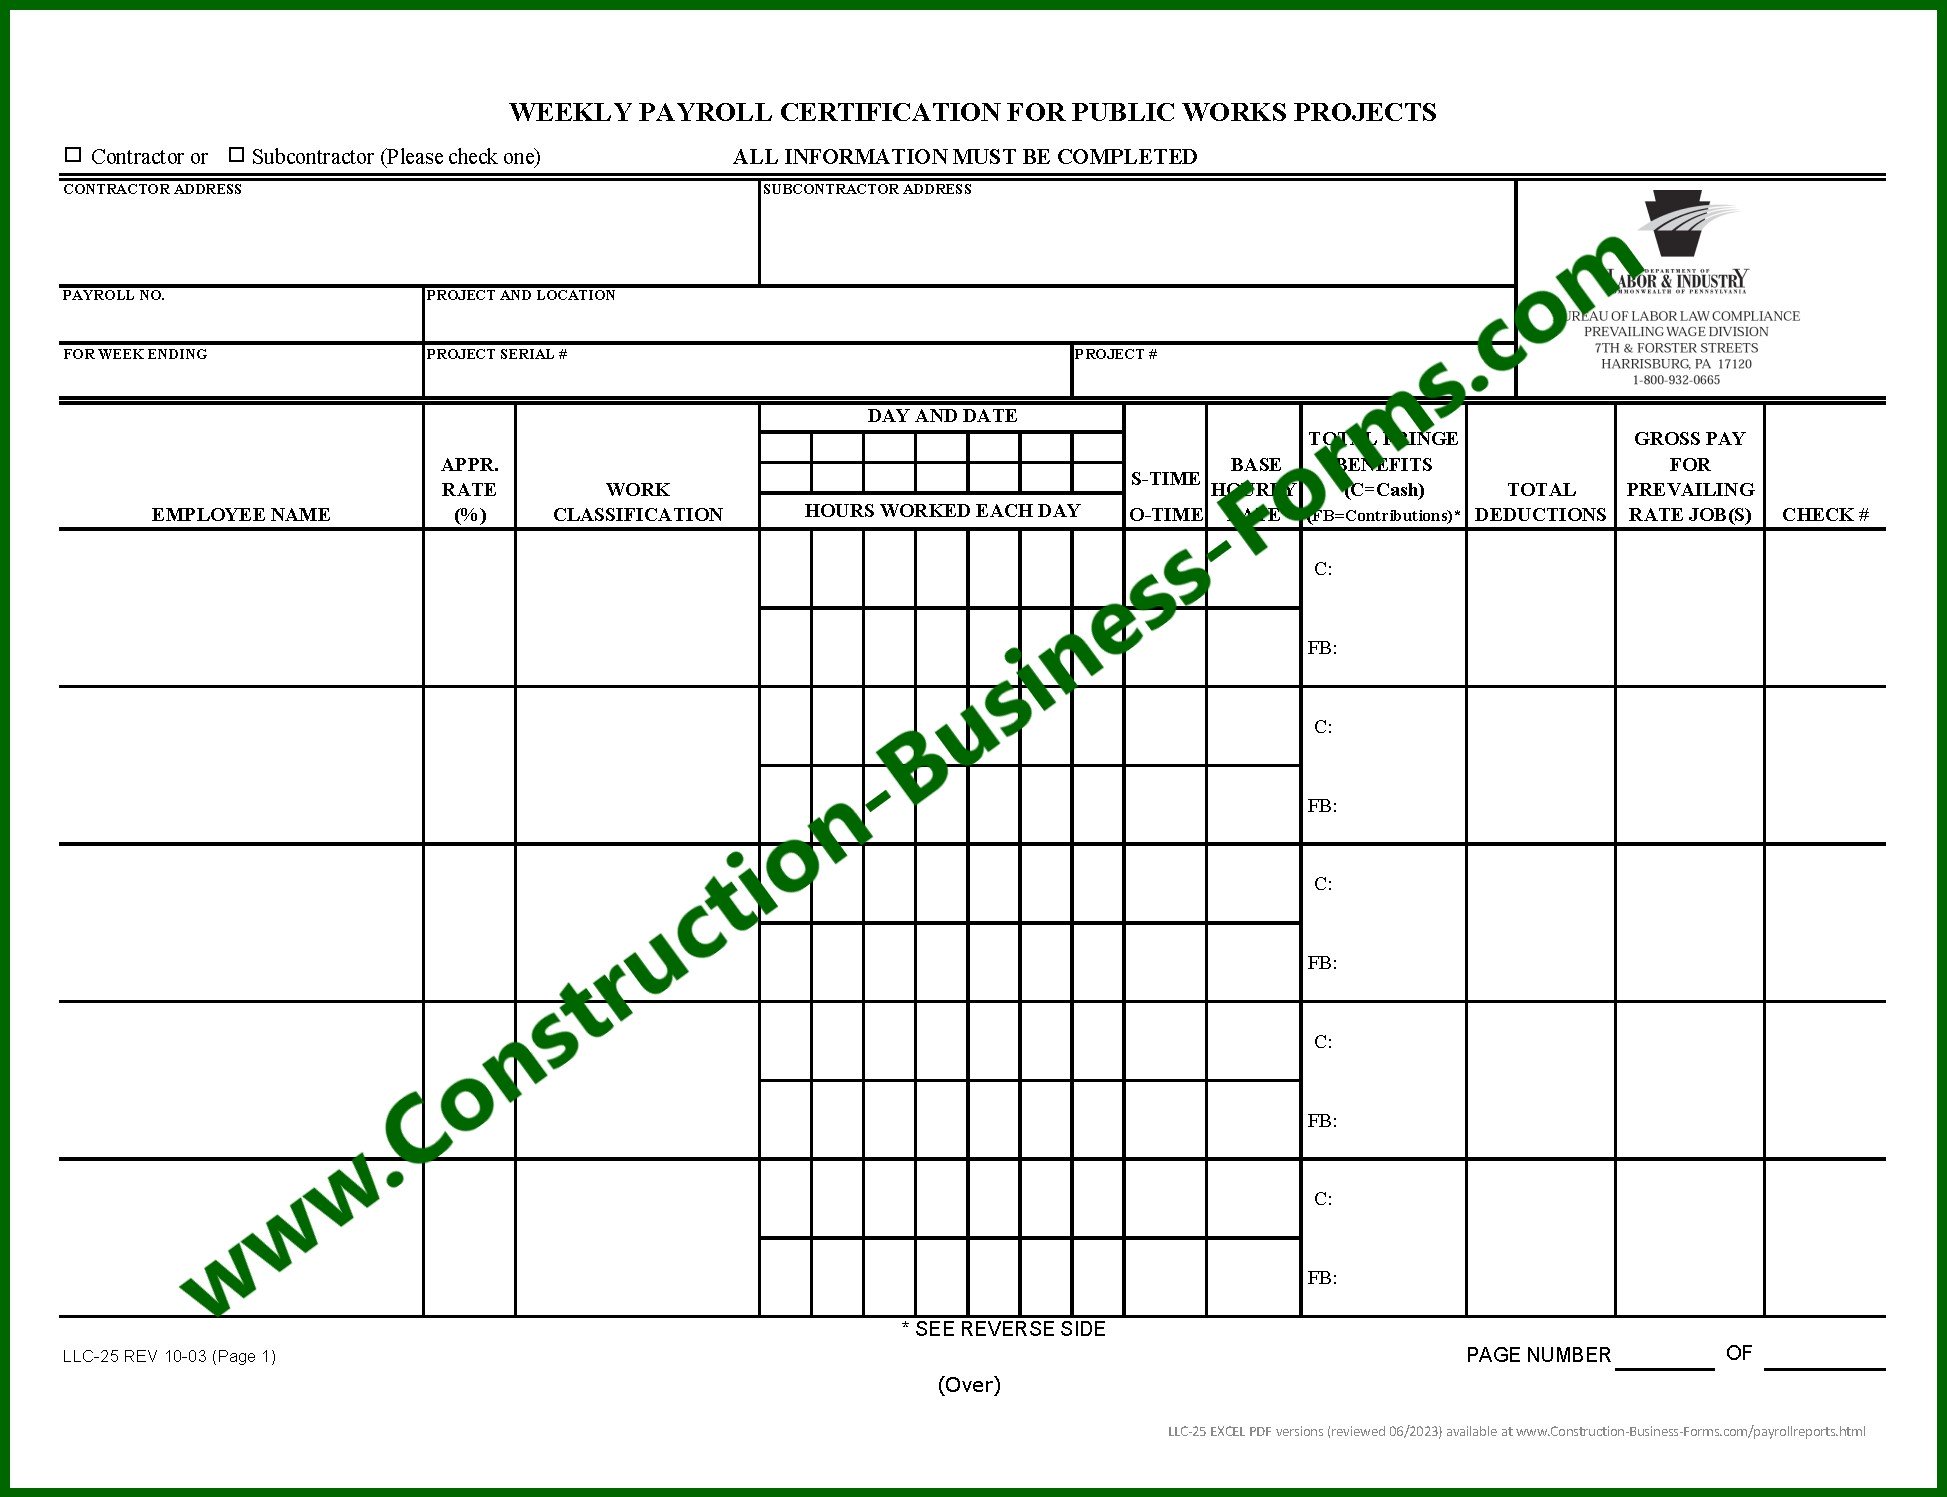 Image of LLC-25 Form Weekly Payroll Certification for Public Works Projects